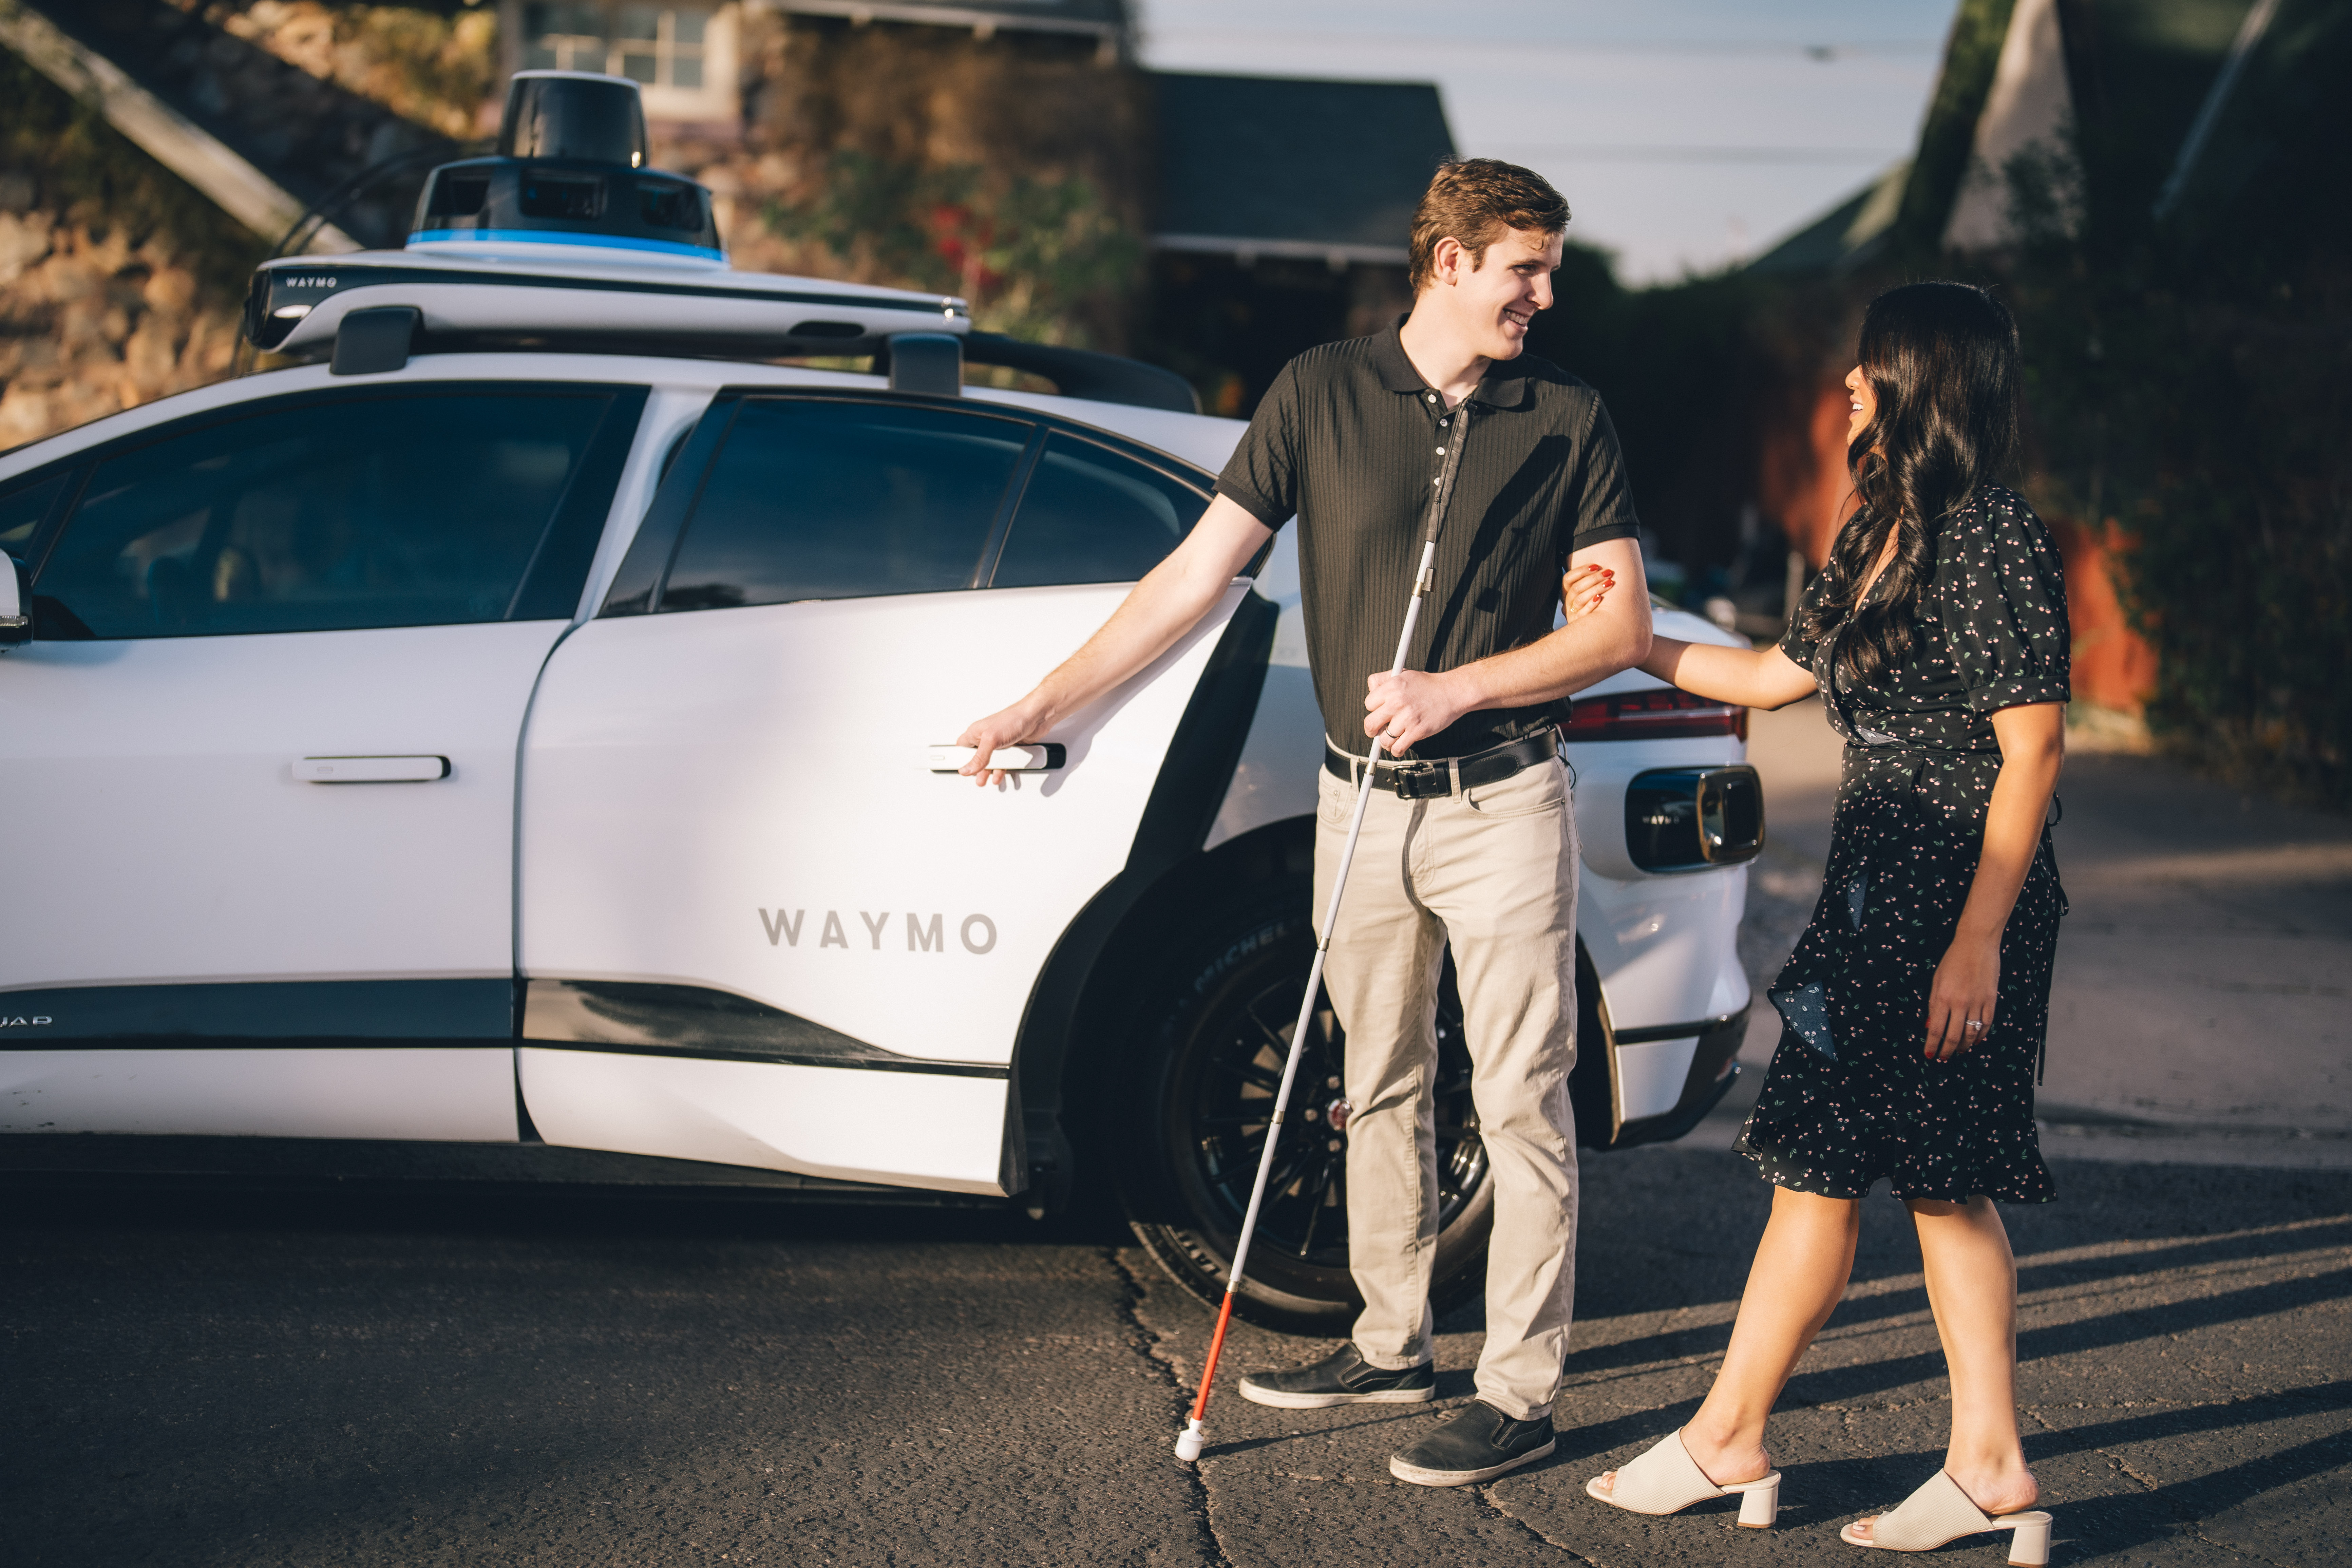 Lilian holding onto Max's arm as he opens the door to a Waymo One autonomous vehicle